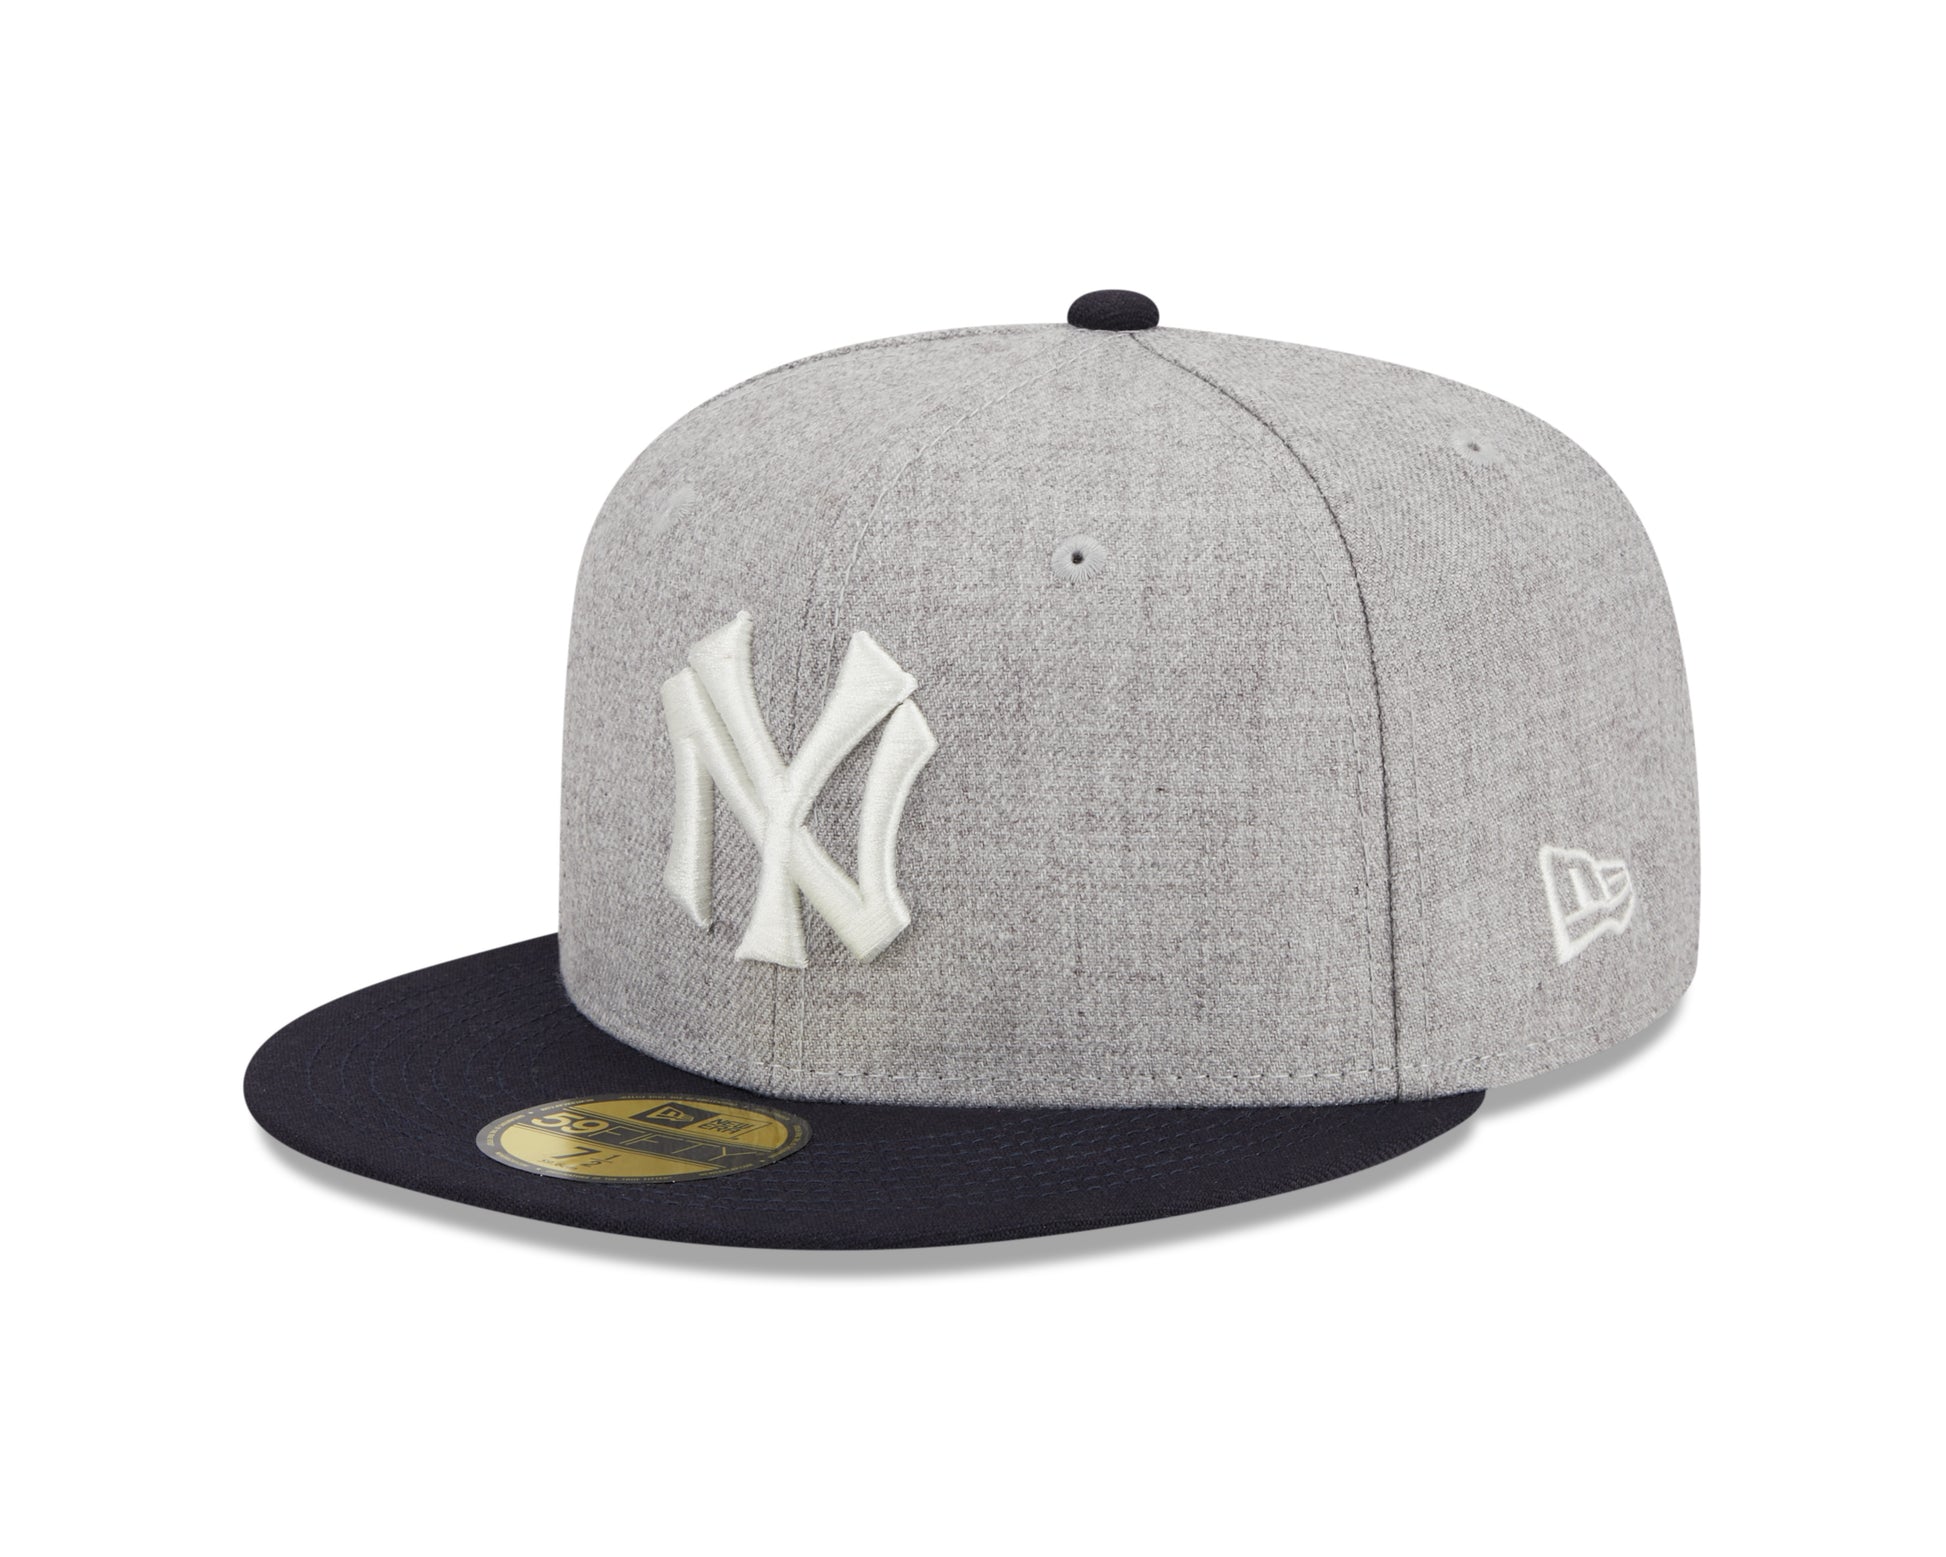 New Era - New York Yankees 59Fifty Fitted DYNASTY - Heather Grey - Headz Up 